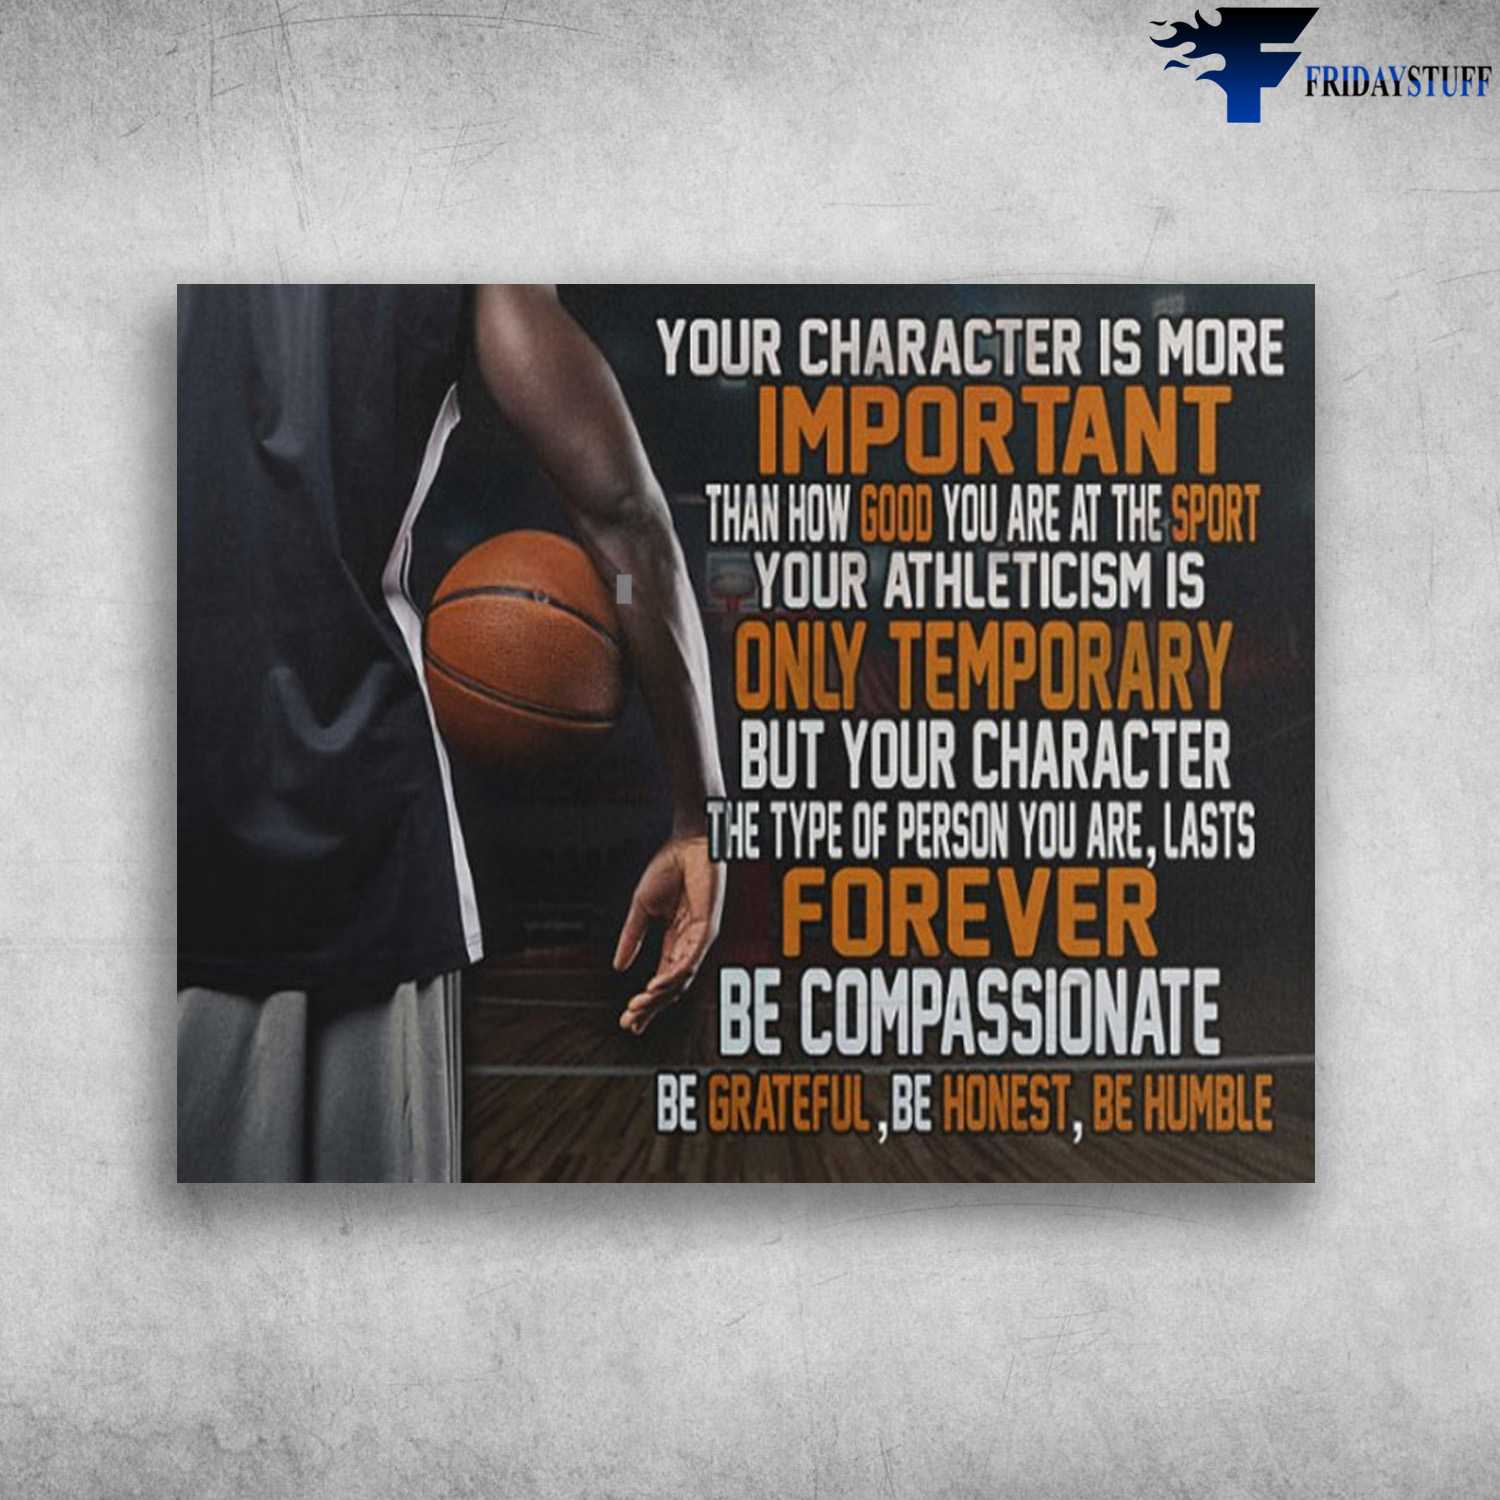 Basketball Player, Your Character Is More Important, Than How Good You Are At The Sport, Your Athleticism Is Only Temporary, But Your Character, The Type Of Person You Are